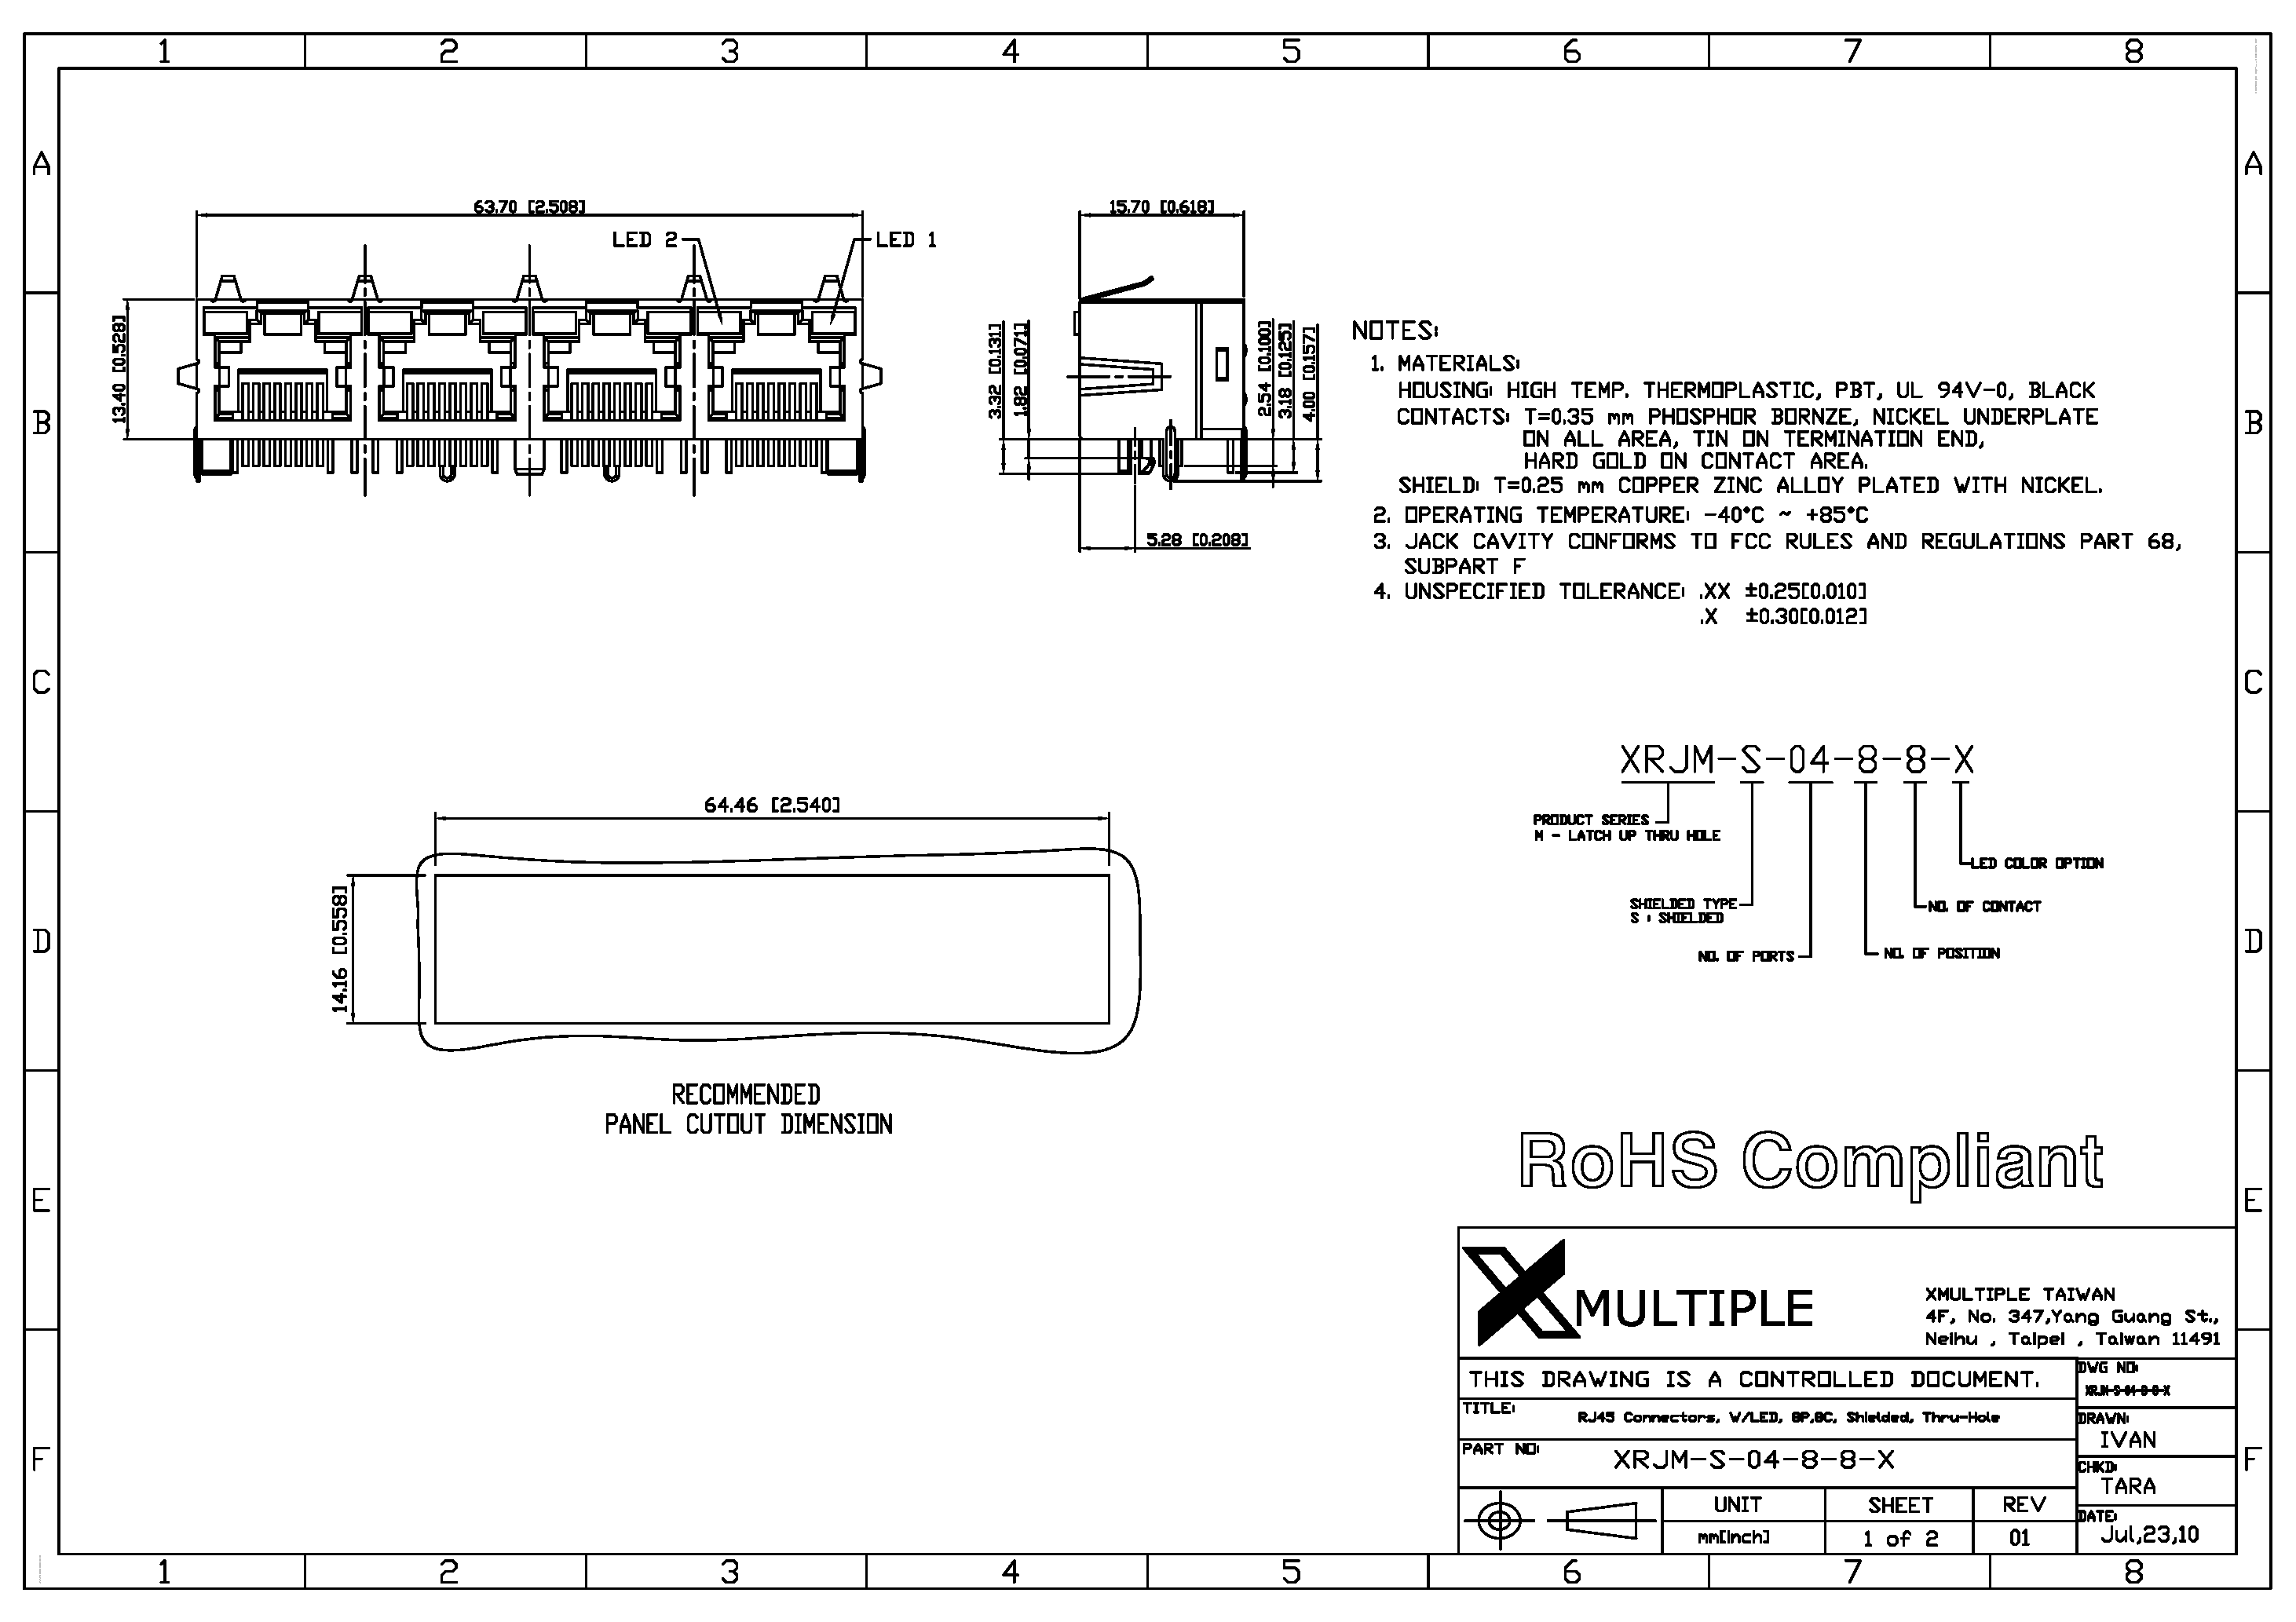 Datasheet XRJM-S-04-8-8-x - Connector page 1